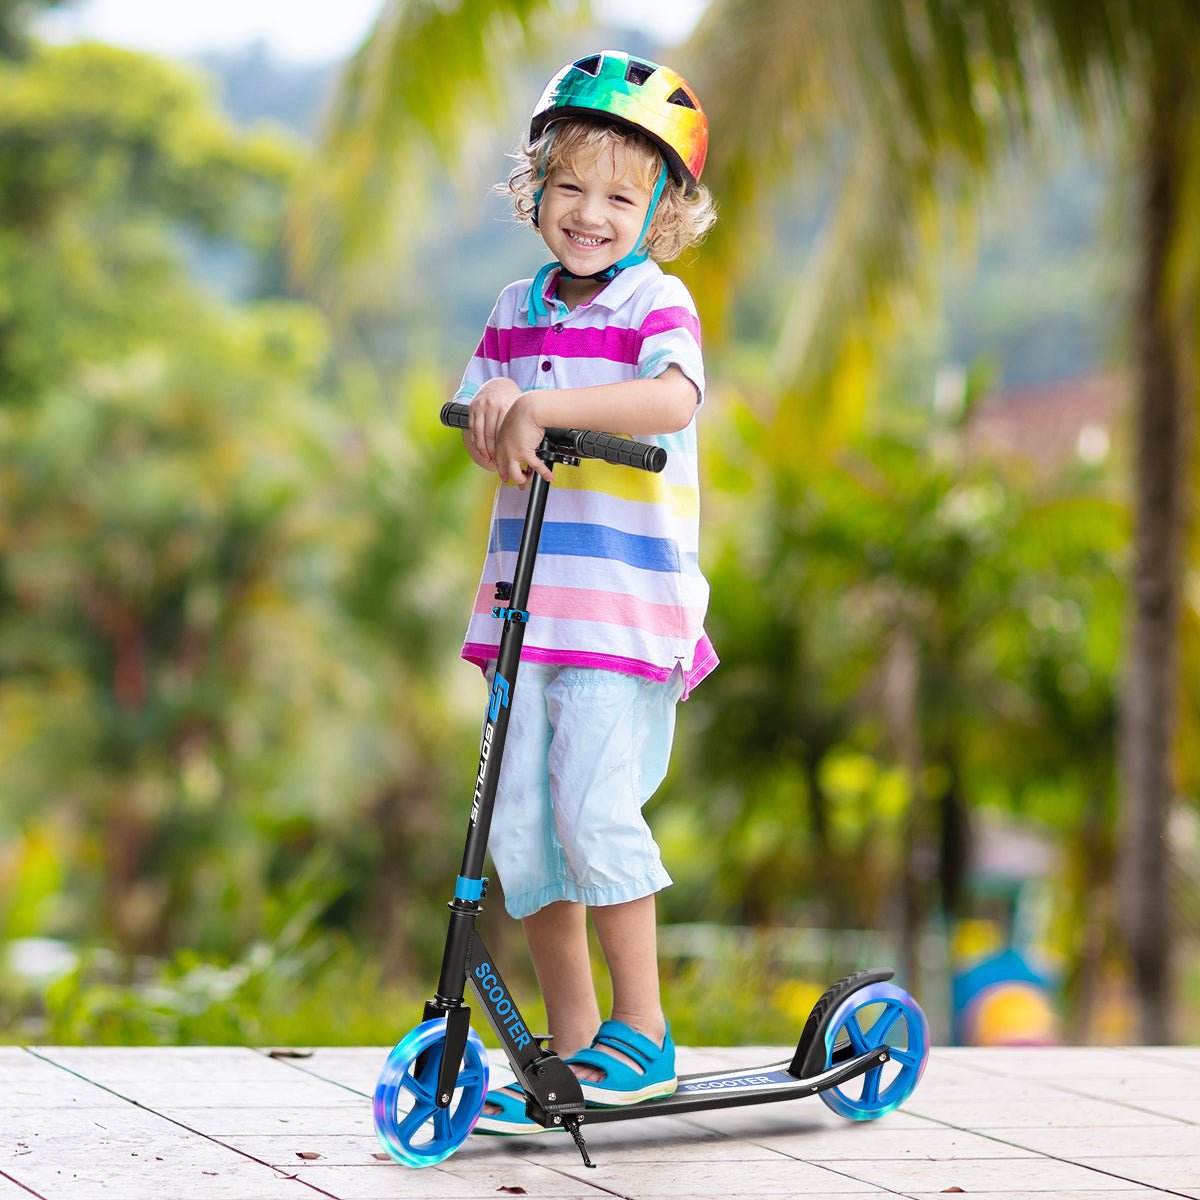 Folding Kick Scooter with LED Wheels: Blue Ride of Joy and Adventure